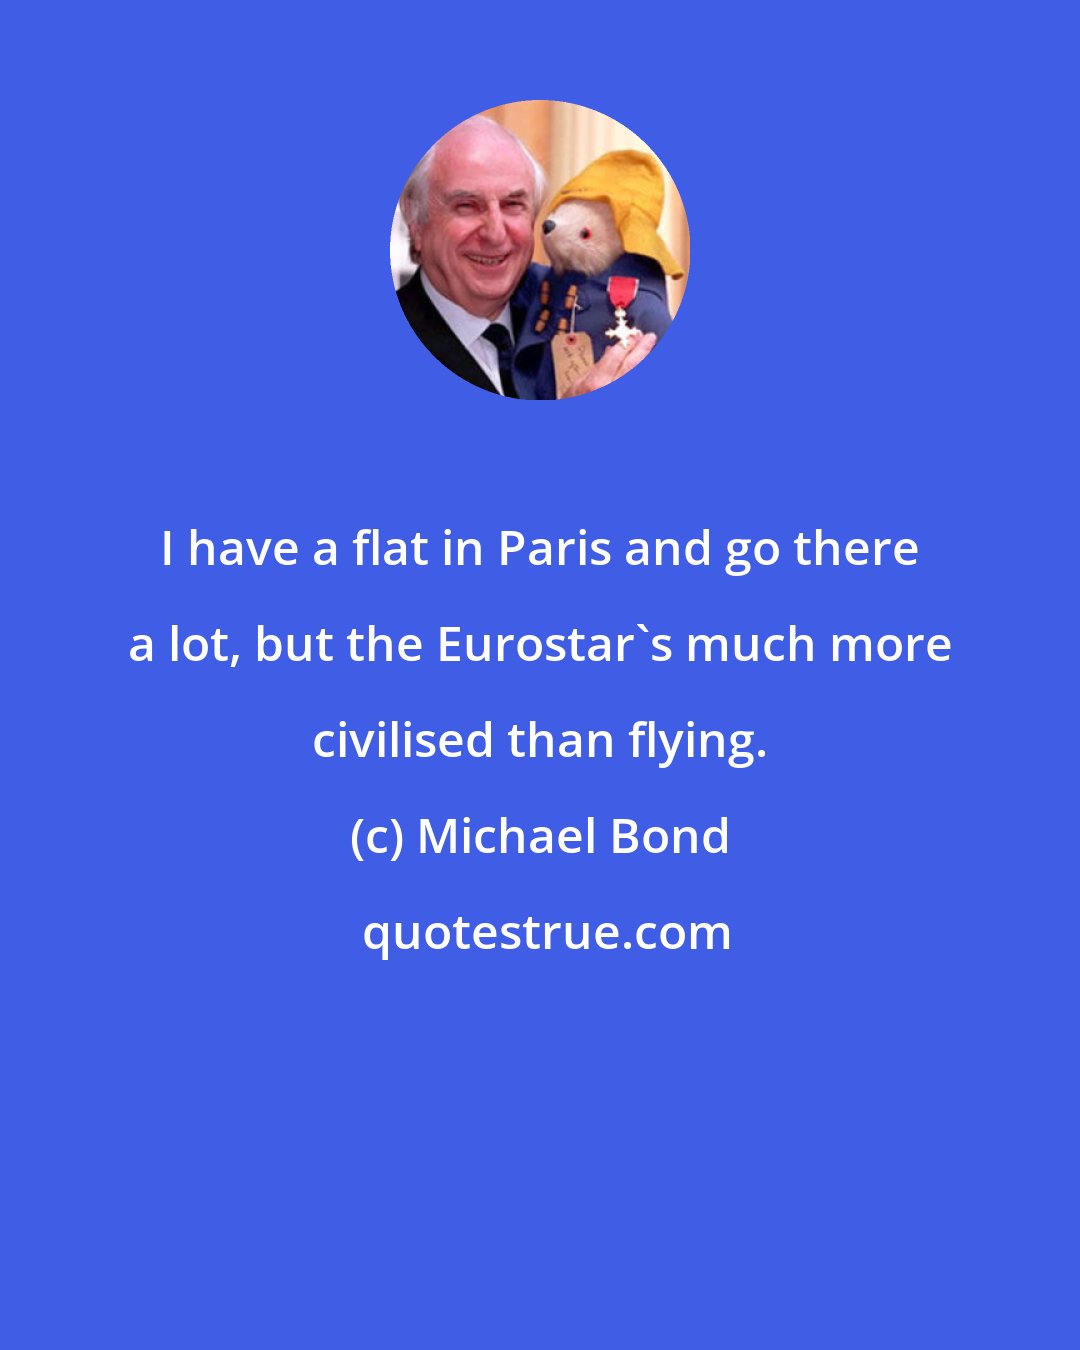 Michael Bond: I have a flat in Paris and go there a lot, but the Eurostar's much more civilised than flying.